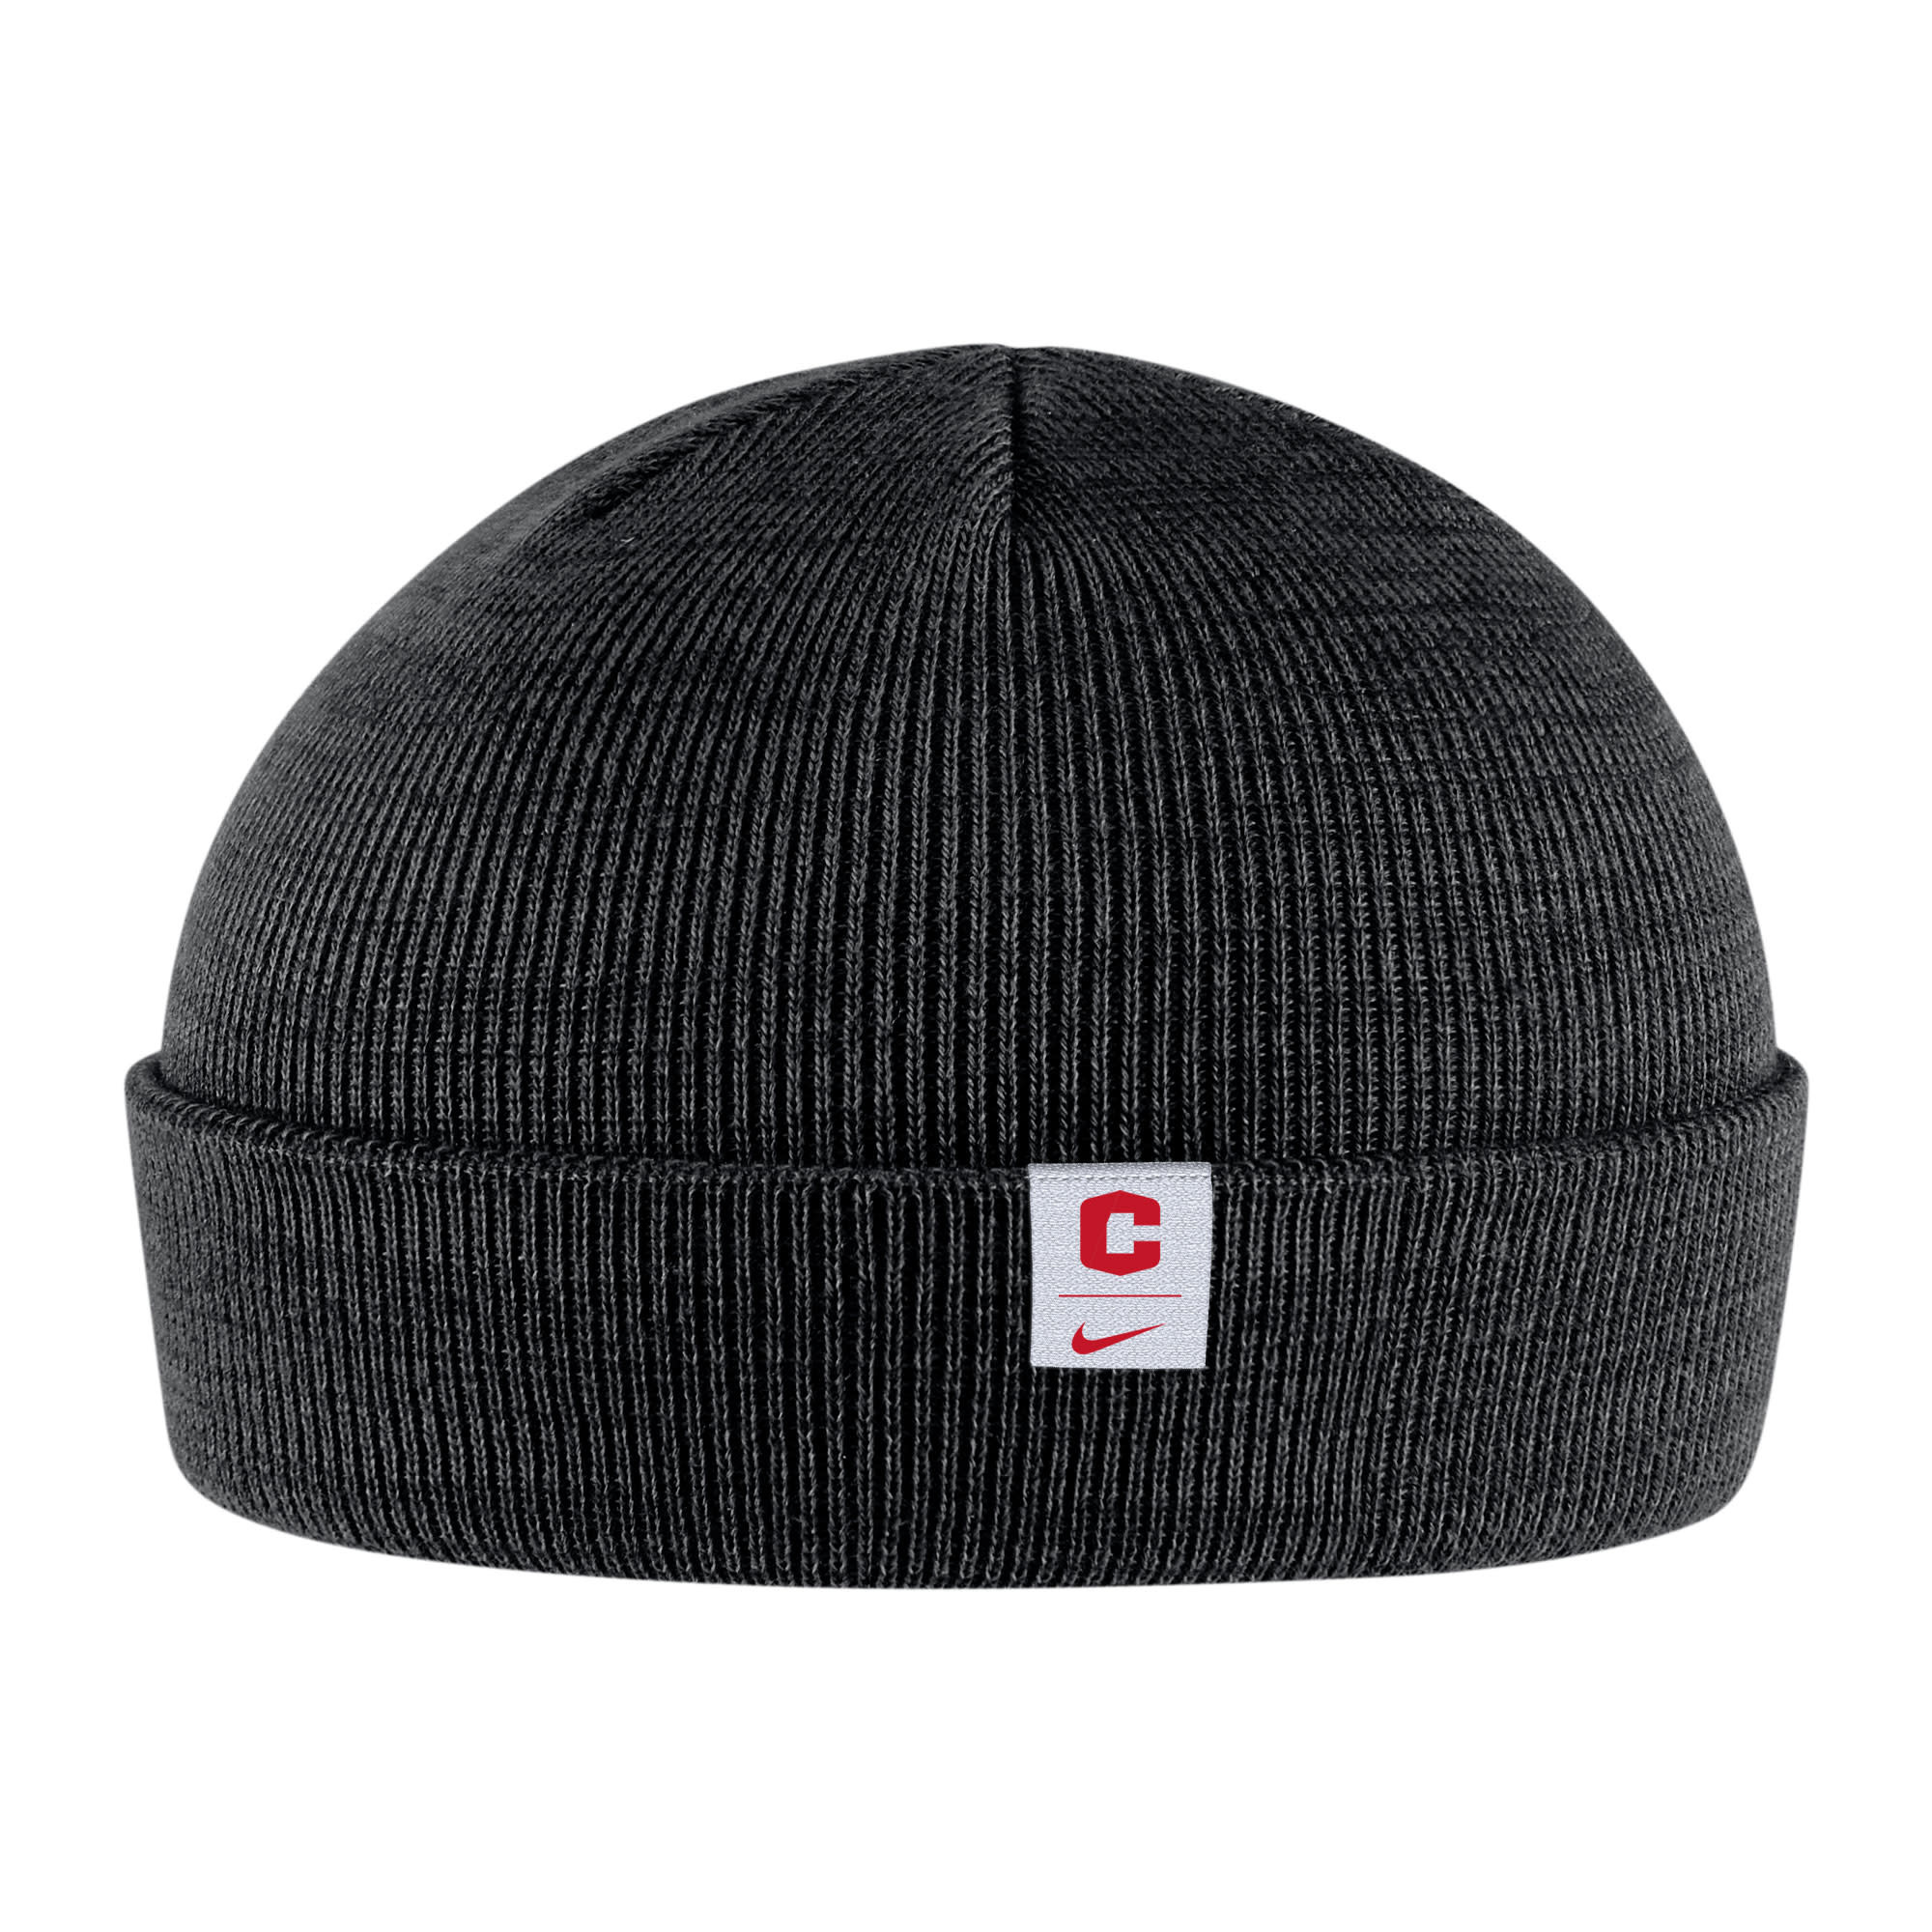 Nike Nike Fisherman Beanie with tag Black - Central College Spirit